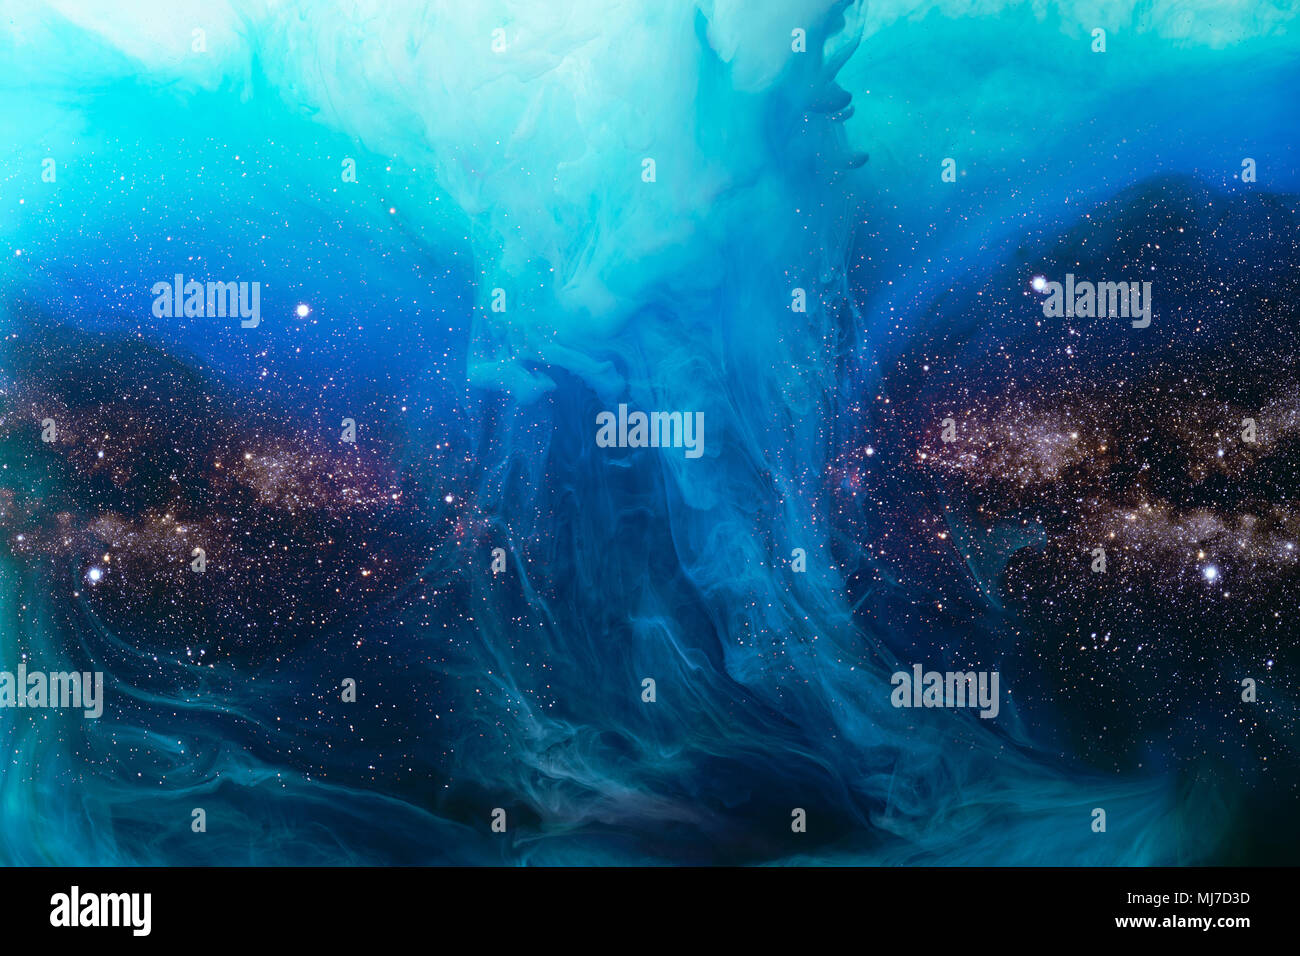 full frame image of mixing blue paint splashes in water with universe background Stock Photo